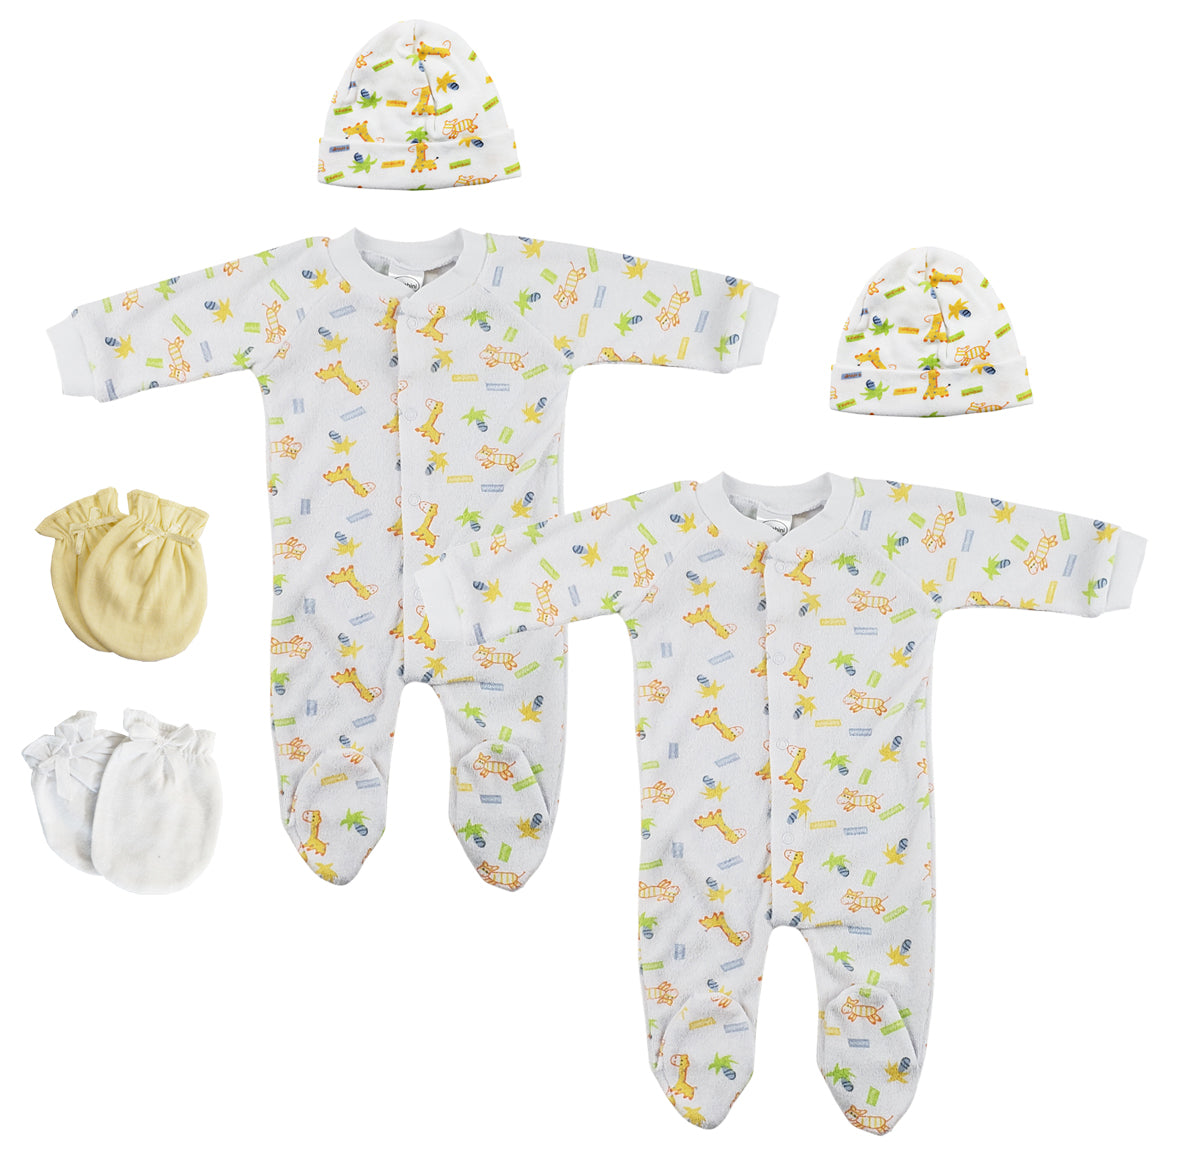 Unisex Closed-toe Sleep & Play with Caps (Pack of 6 ) NC_0711